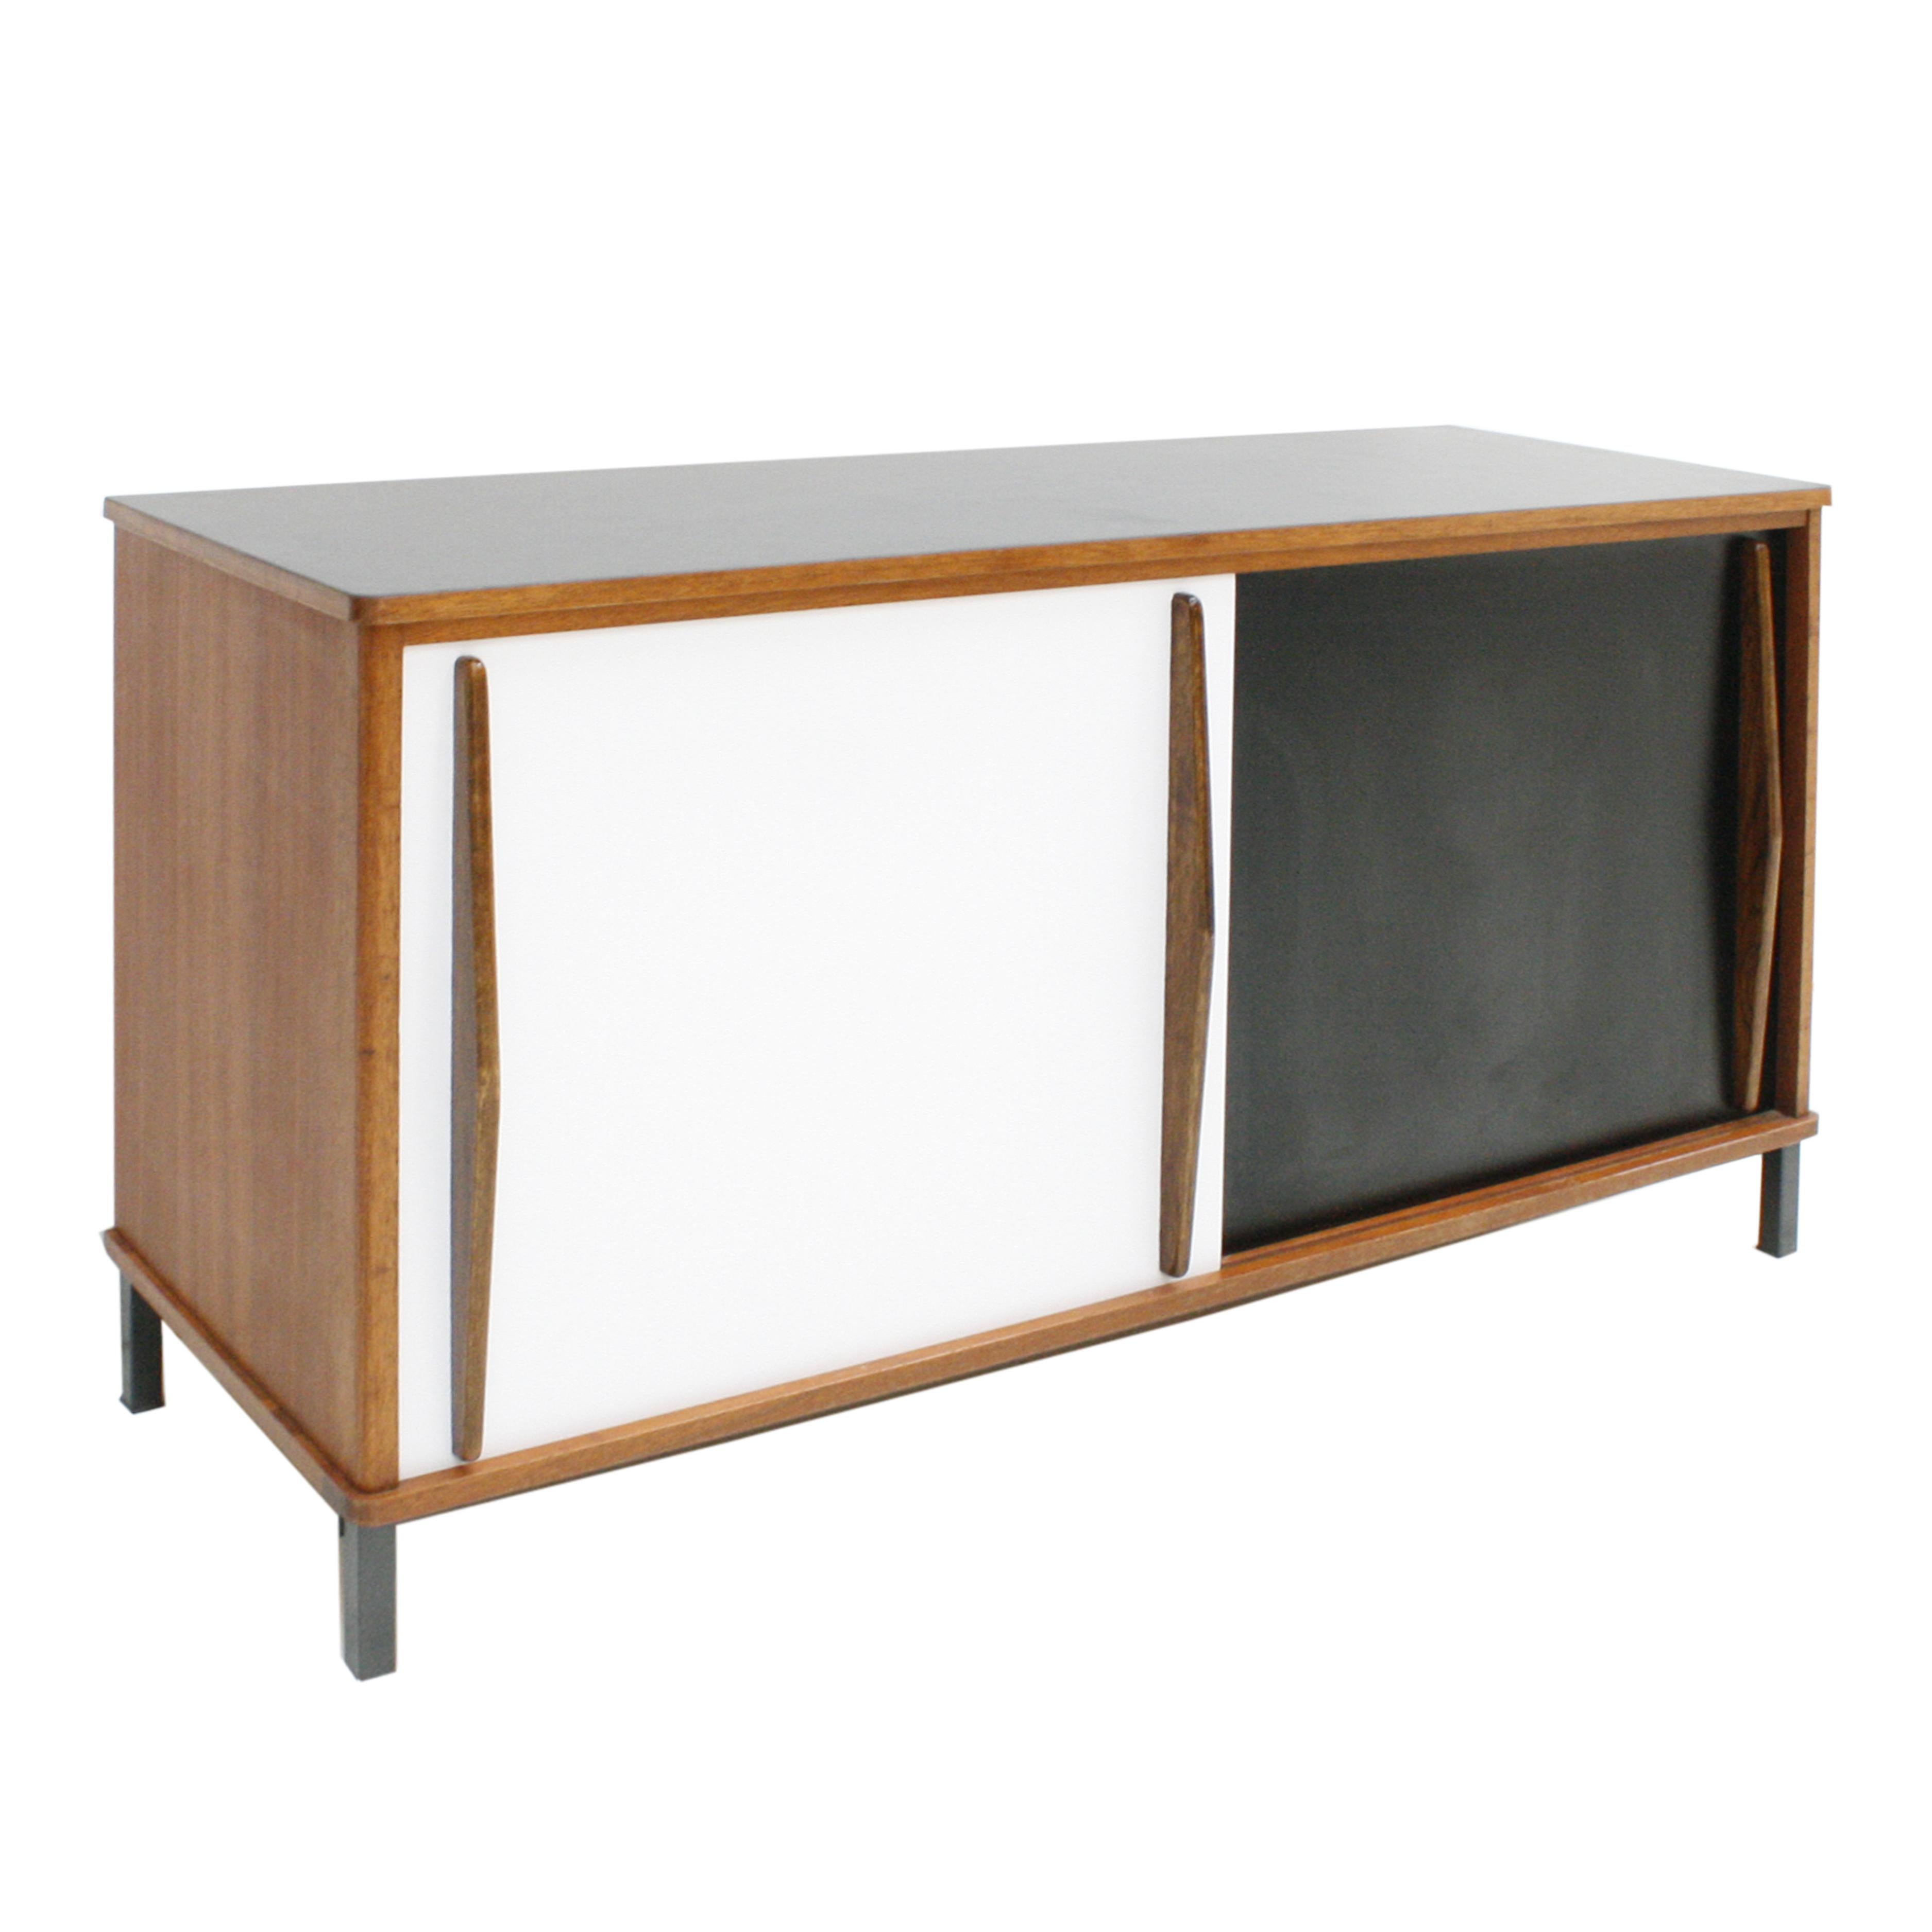 Laminated Charlotte Perriand Mid-Century Modern Wood and Metal 